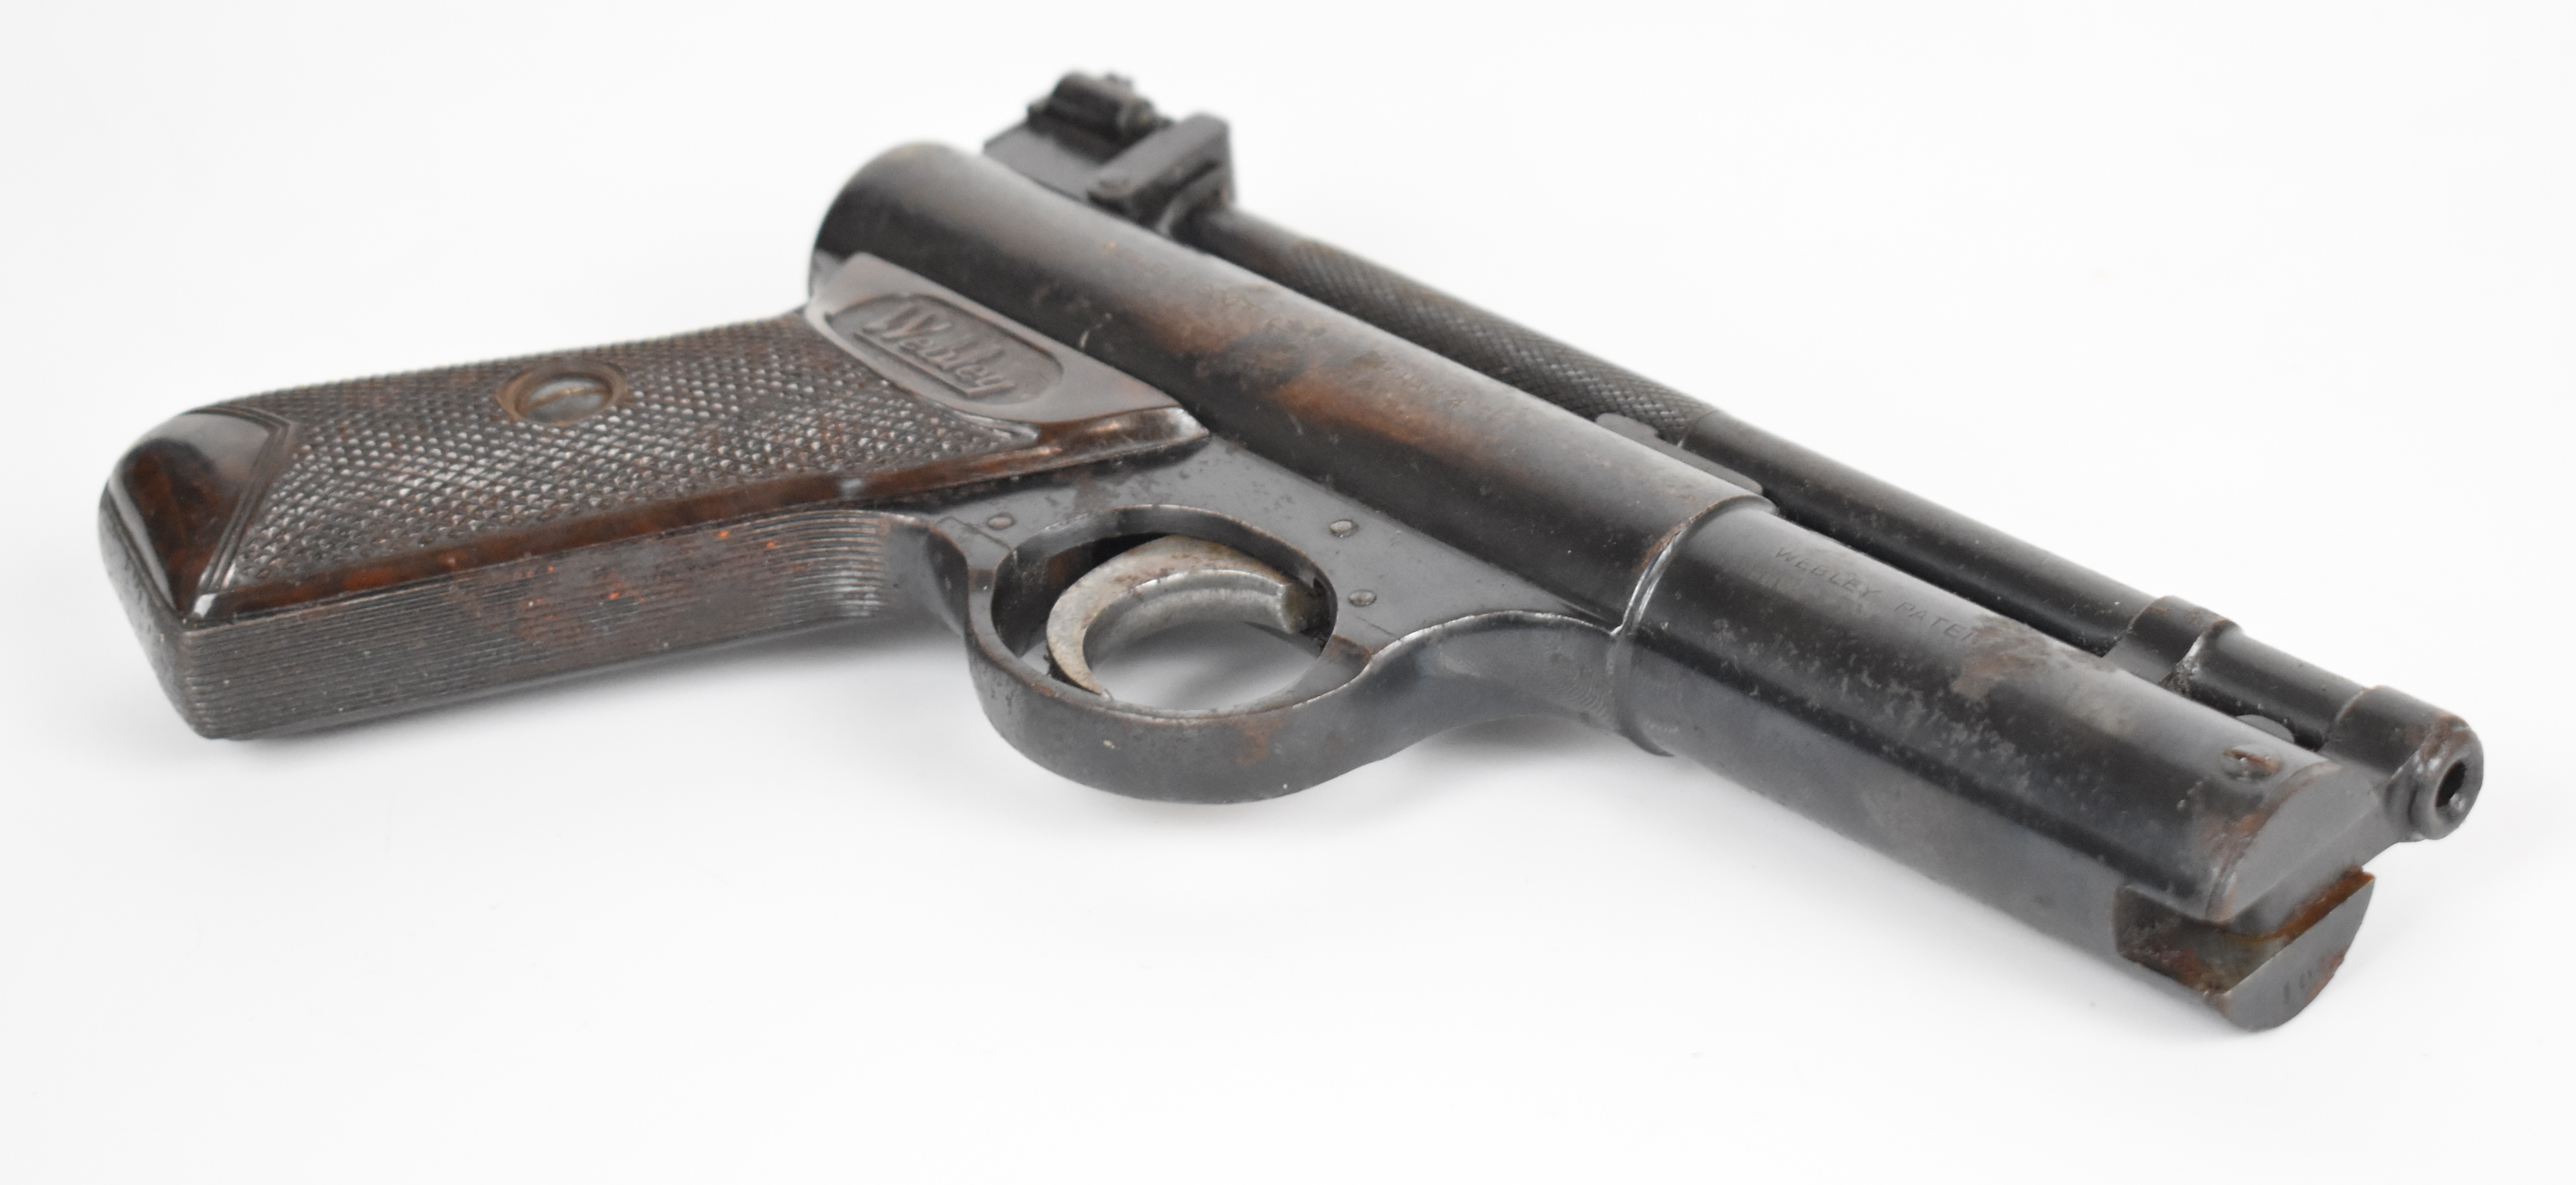 Webley Senior .177 air pistol with named and chequered Bakelite grips and adjustable sights, - Image 4 of 12